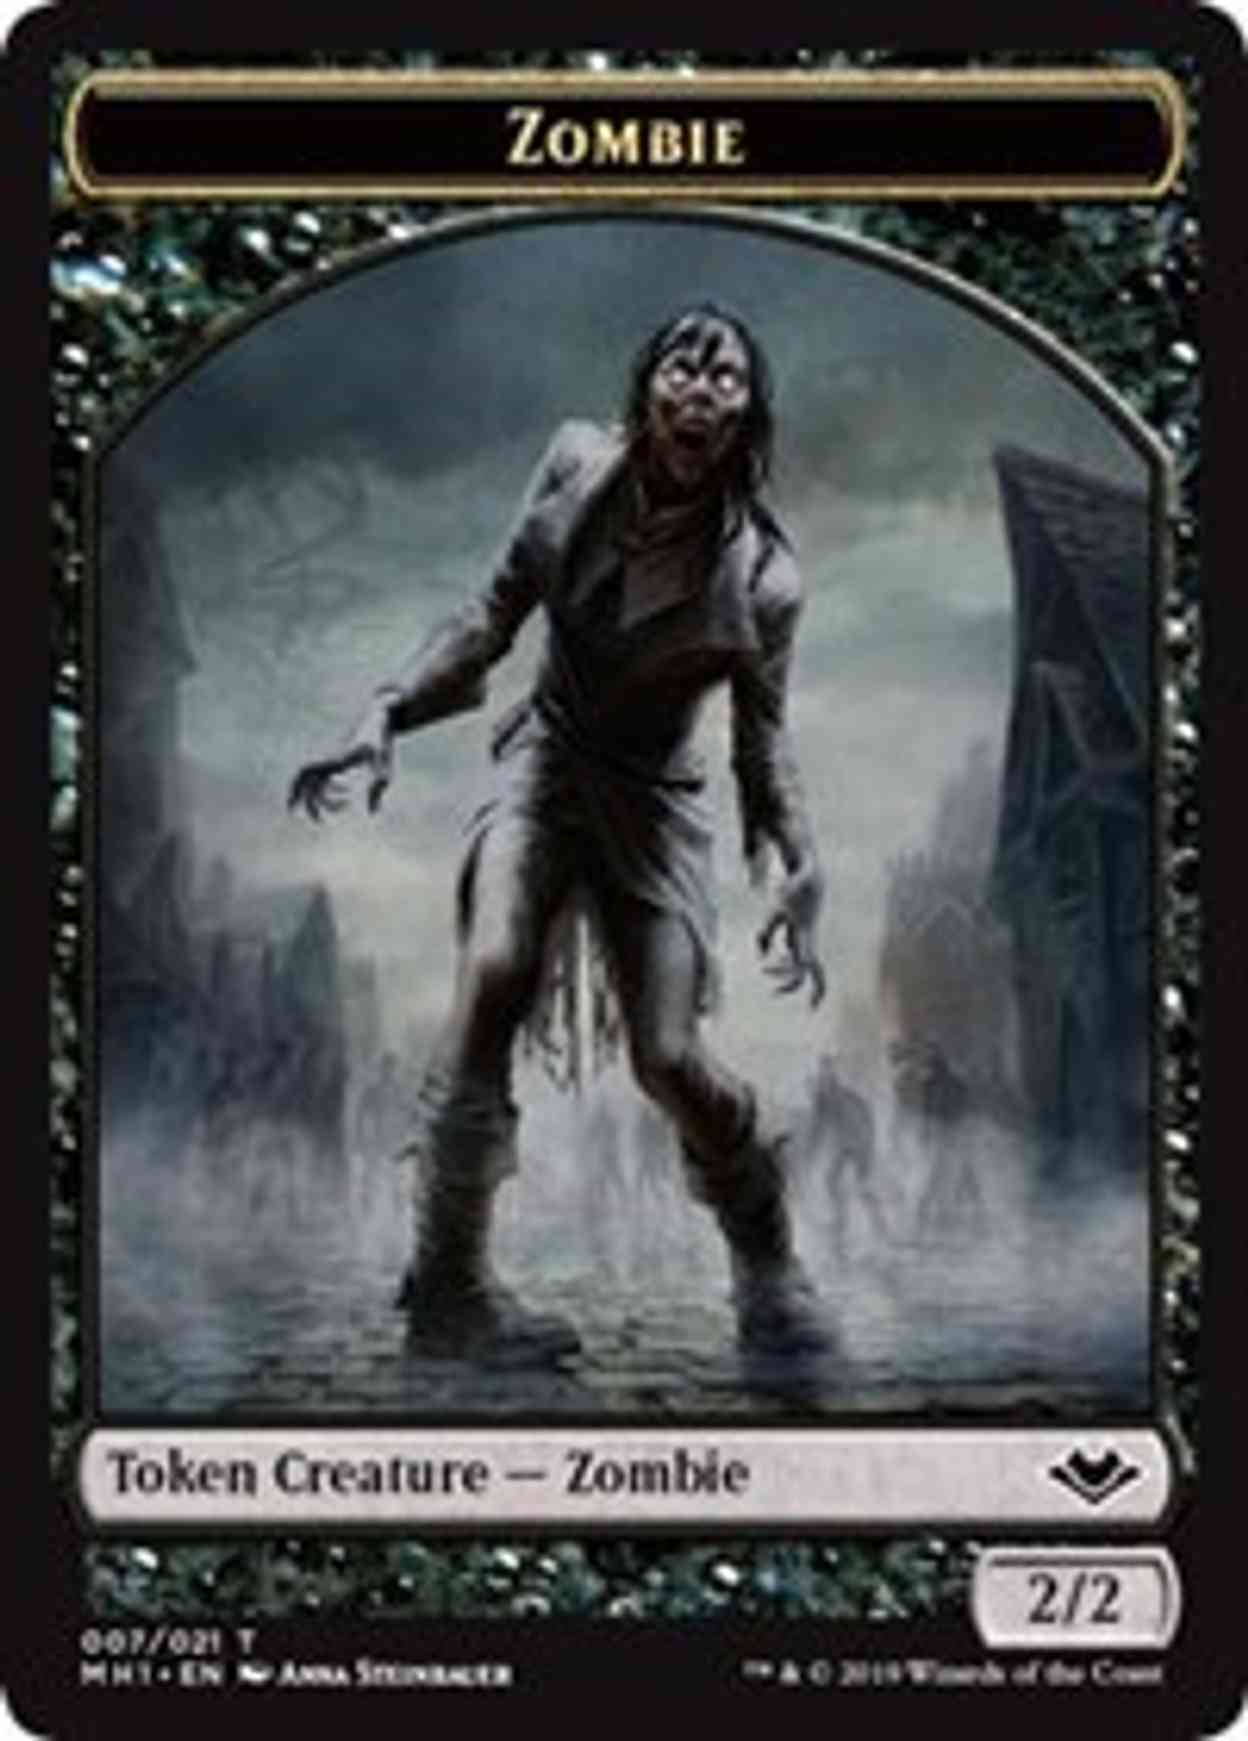 Zombie (007) // Emblem - Wrenn and Six (021) Double-sided Token magic card front